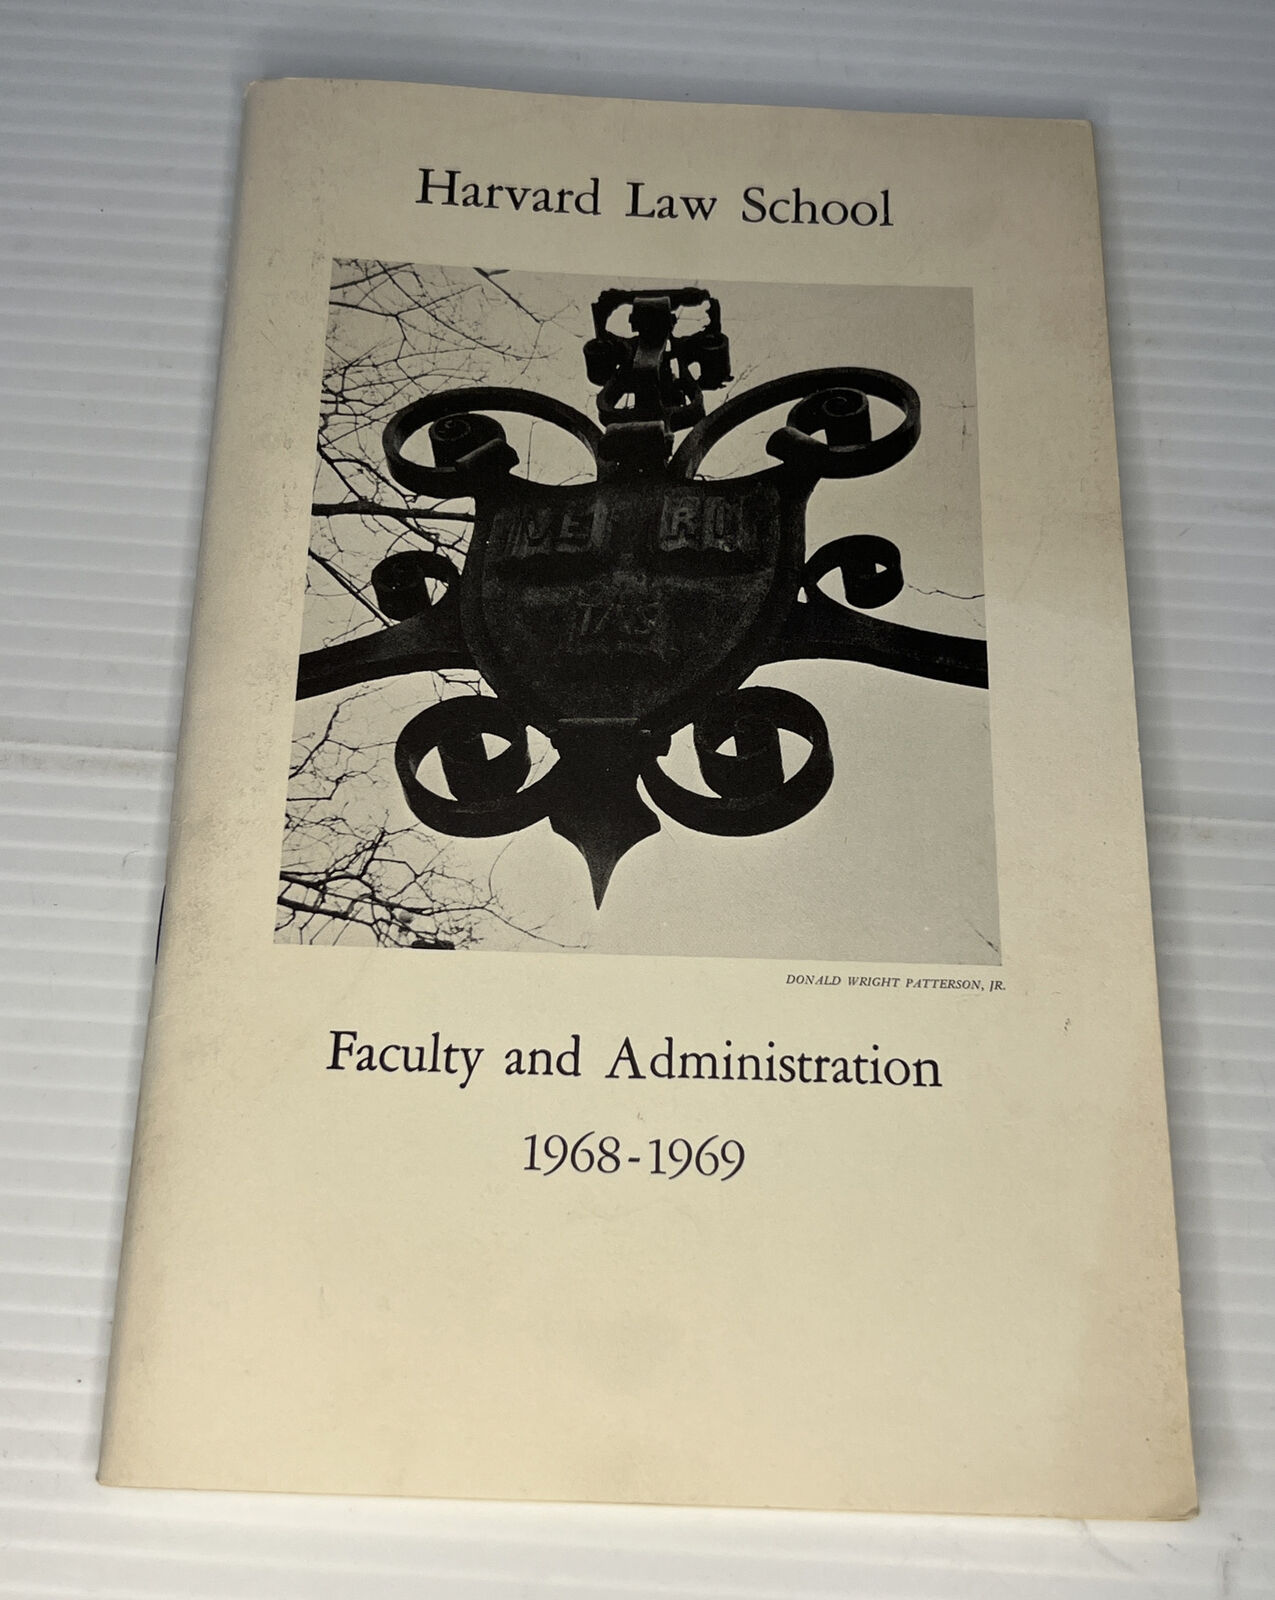 VINTAGE BOOKLET HARVARD LAW SCHOOL FACULTY AND ADMINISTRATION 1968-1969